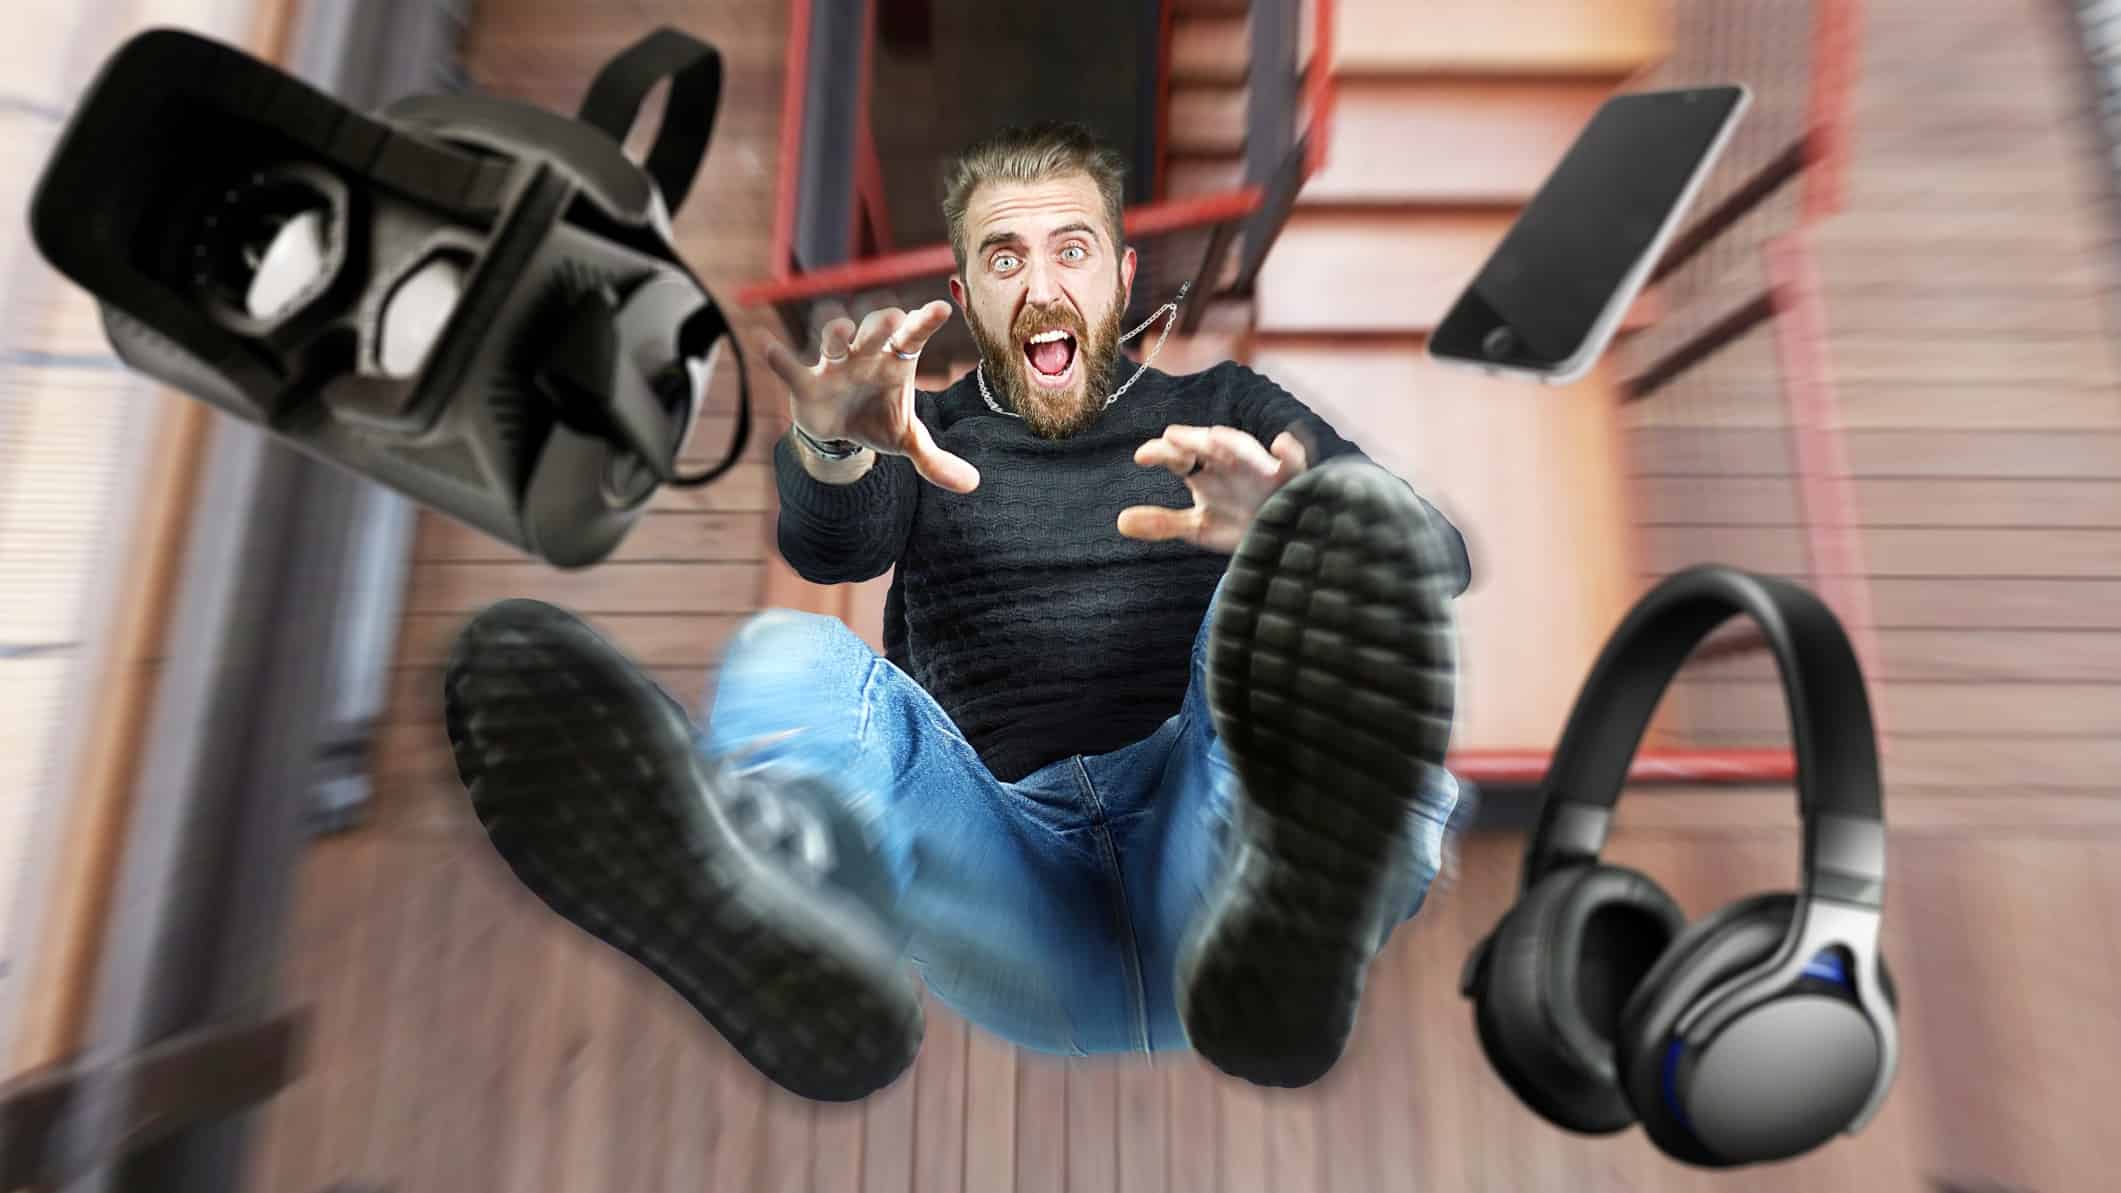 A man yells as his virtual reality headset and earphones tumble to the floor.